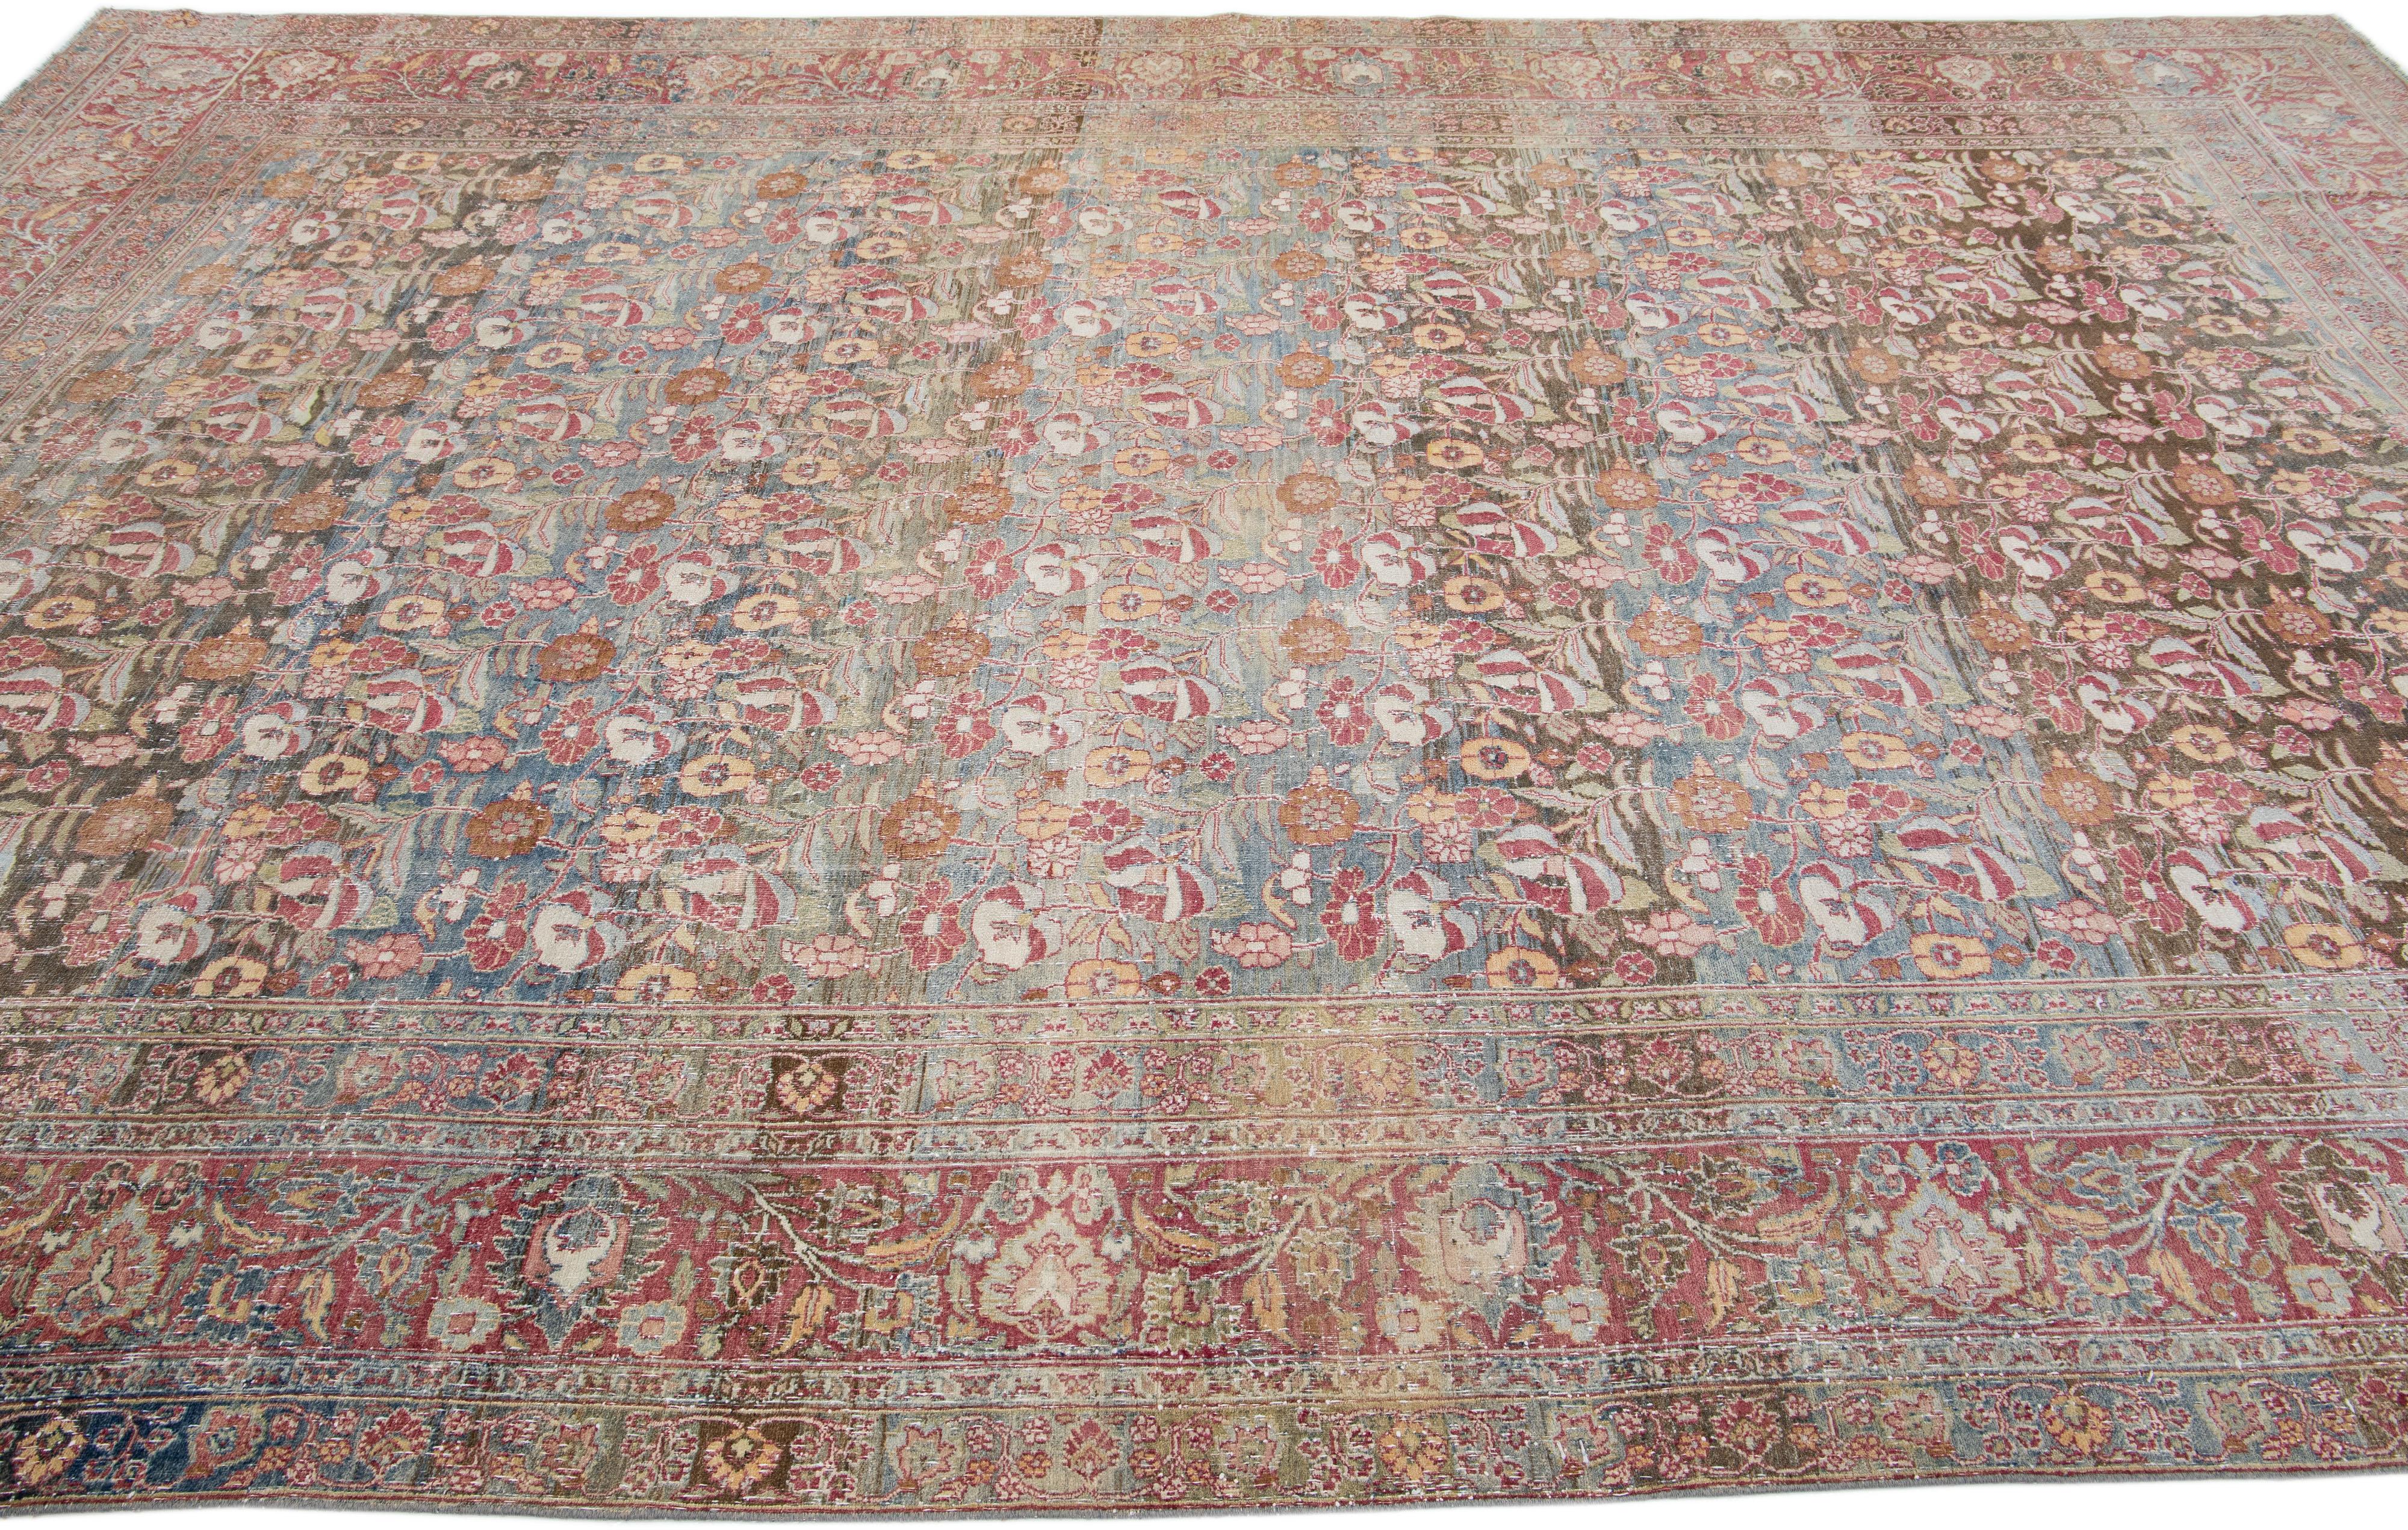 Allover Floral Handmade Antique Mahal Wool Rug in Earth Tones In Good Condition For Sale In Norwalk, CT